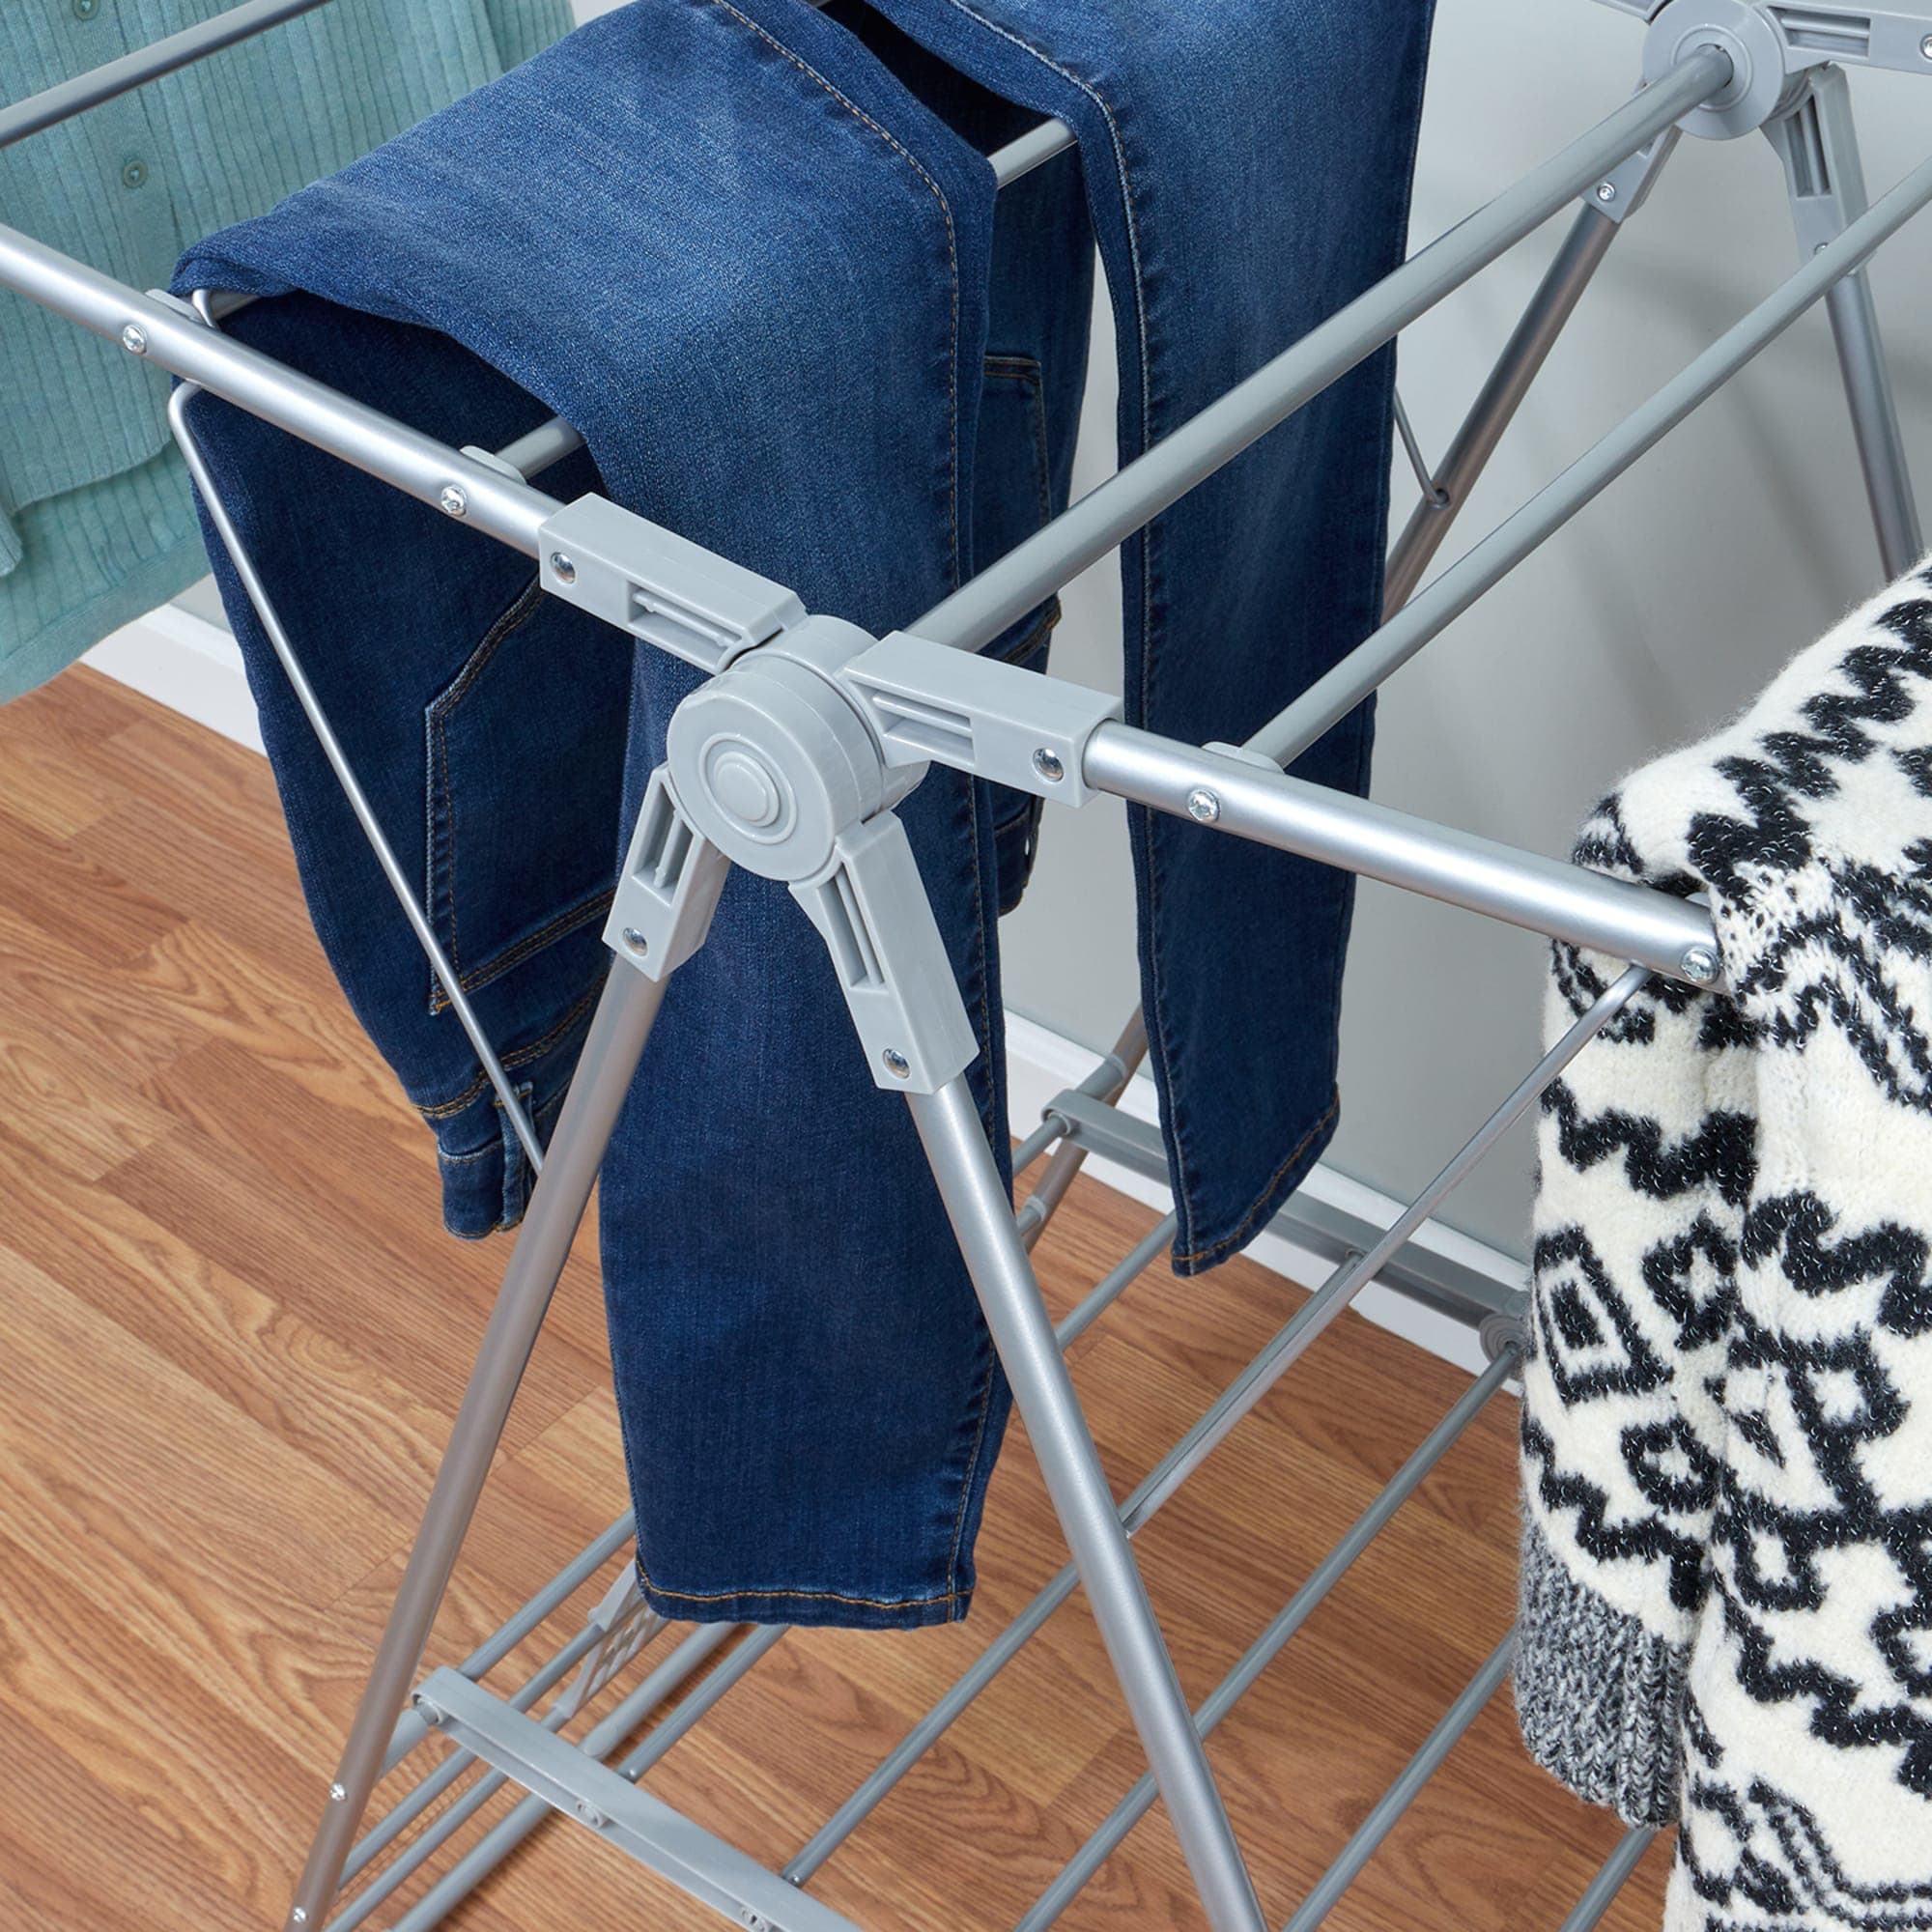 Home Basics  Folding and Collapsible Indoor and Outdoors  Clothes Drying Rack, Silver $20.00 EACH, CASE PACK OF 4